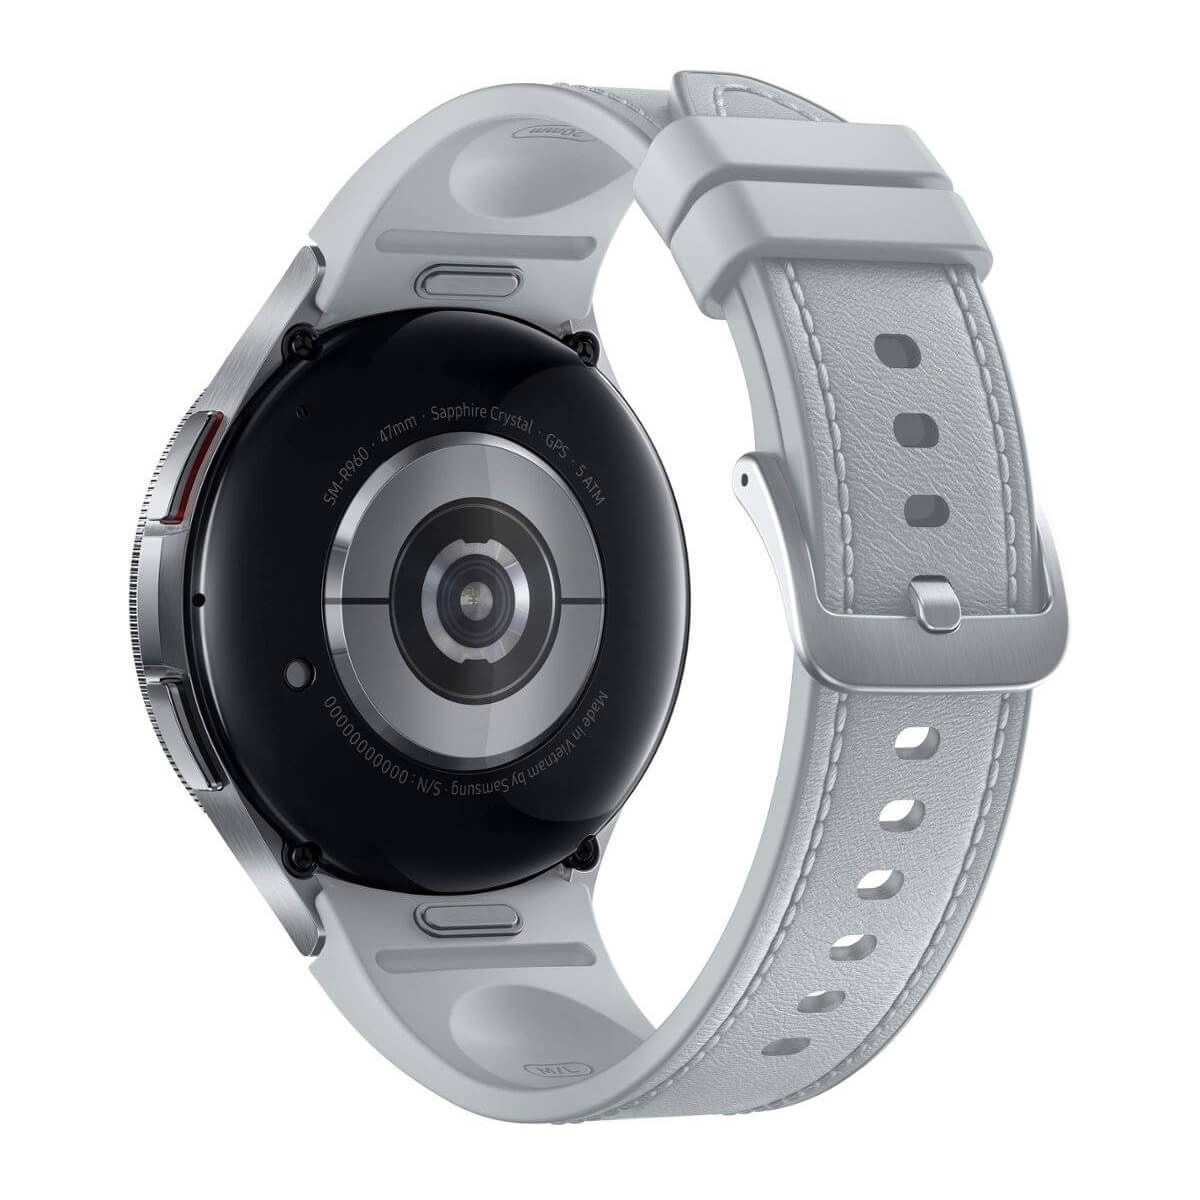 JS Watch 6 Max Classic Smartwatch with AMOLED Display